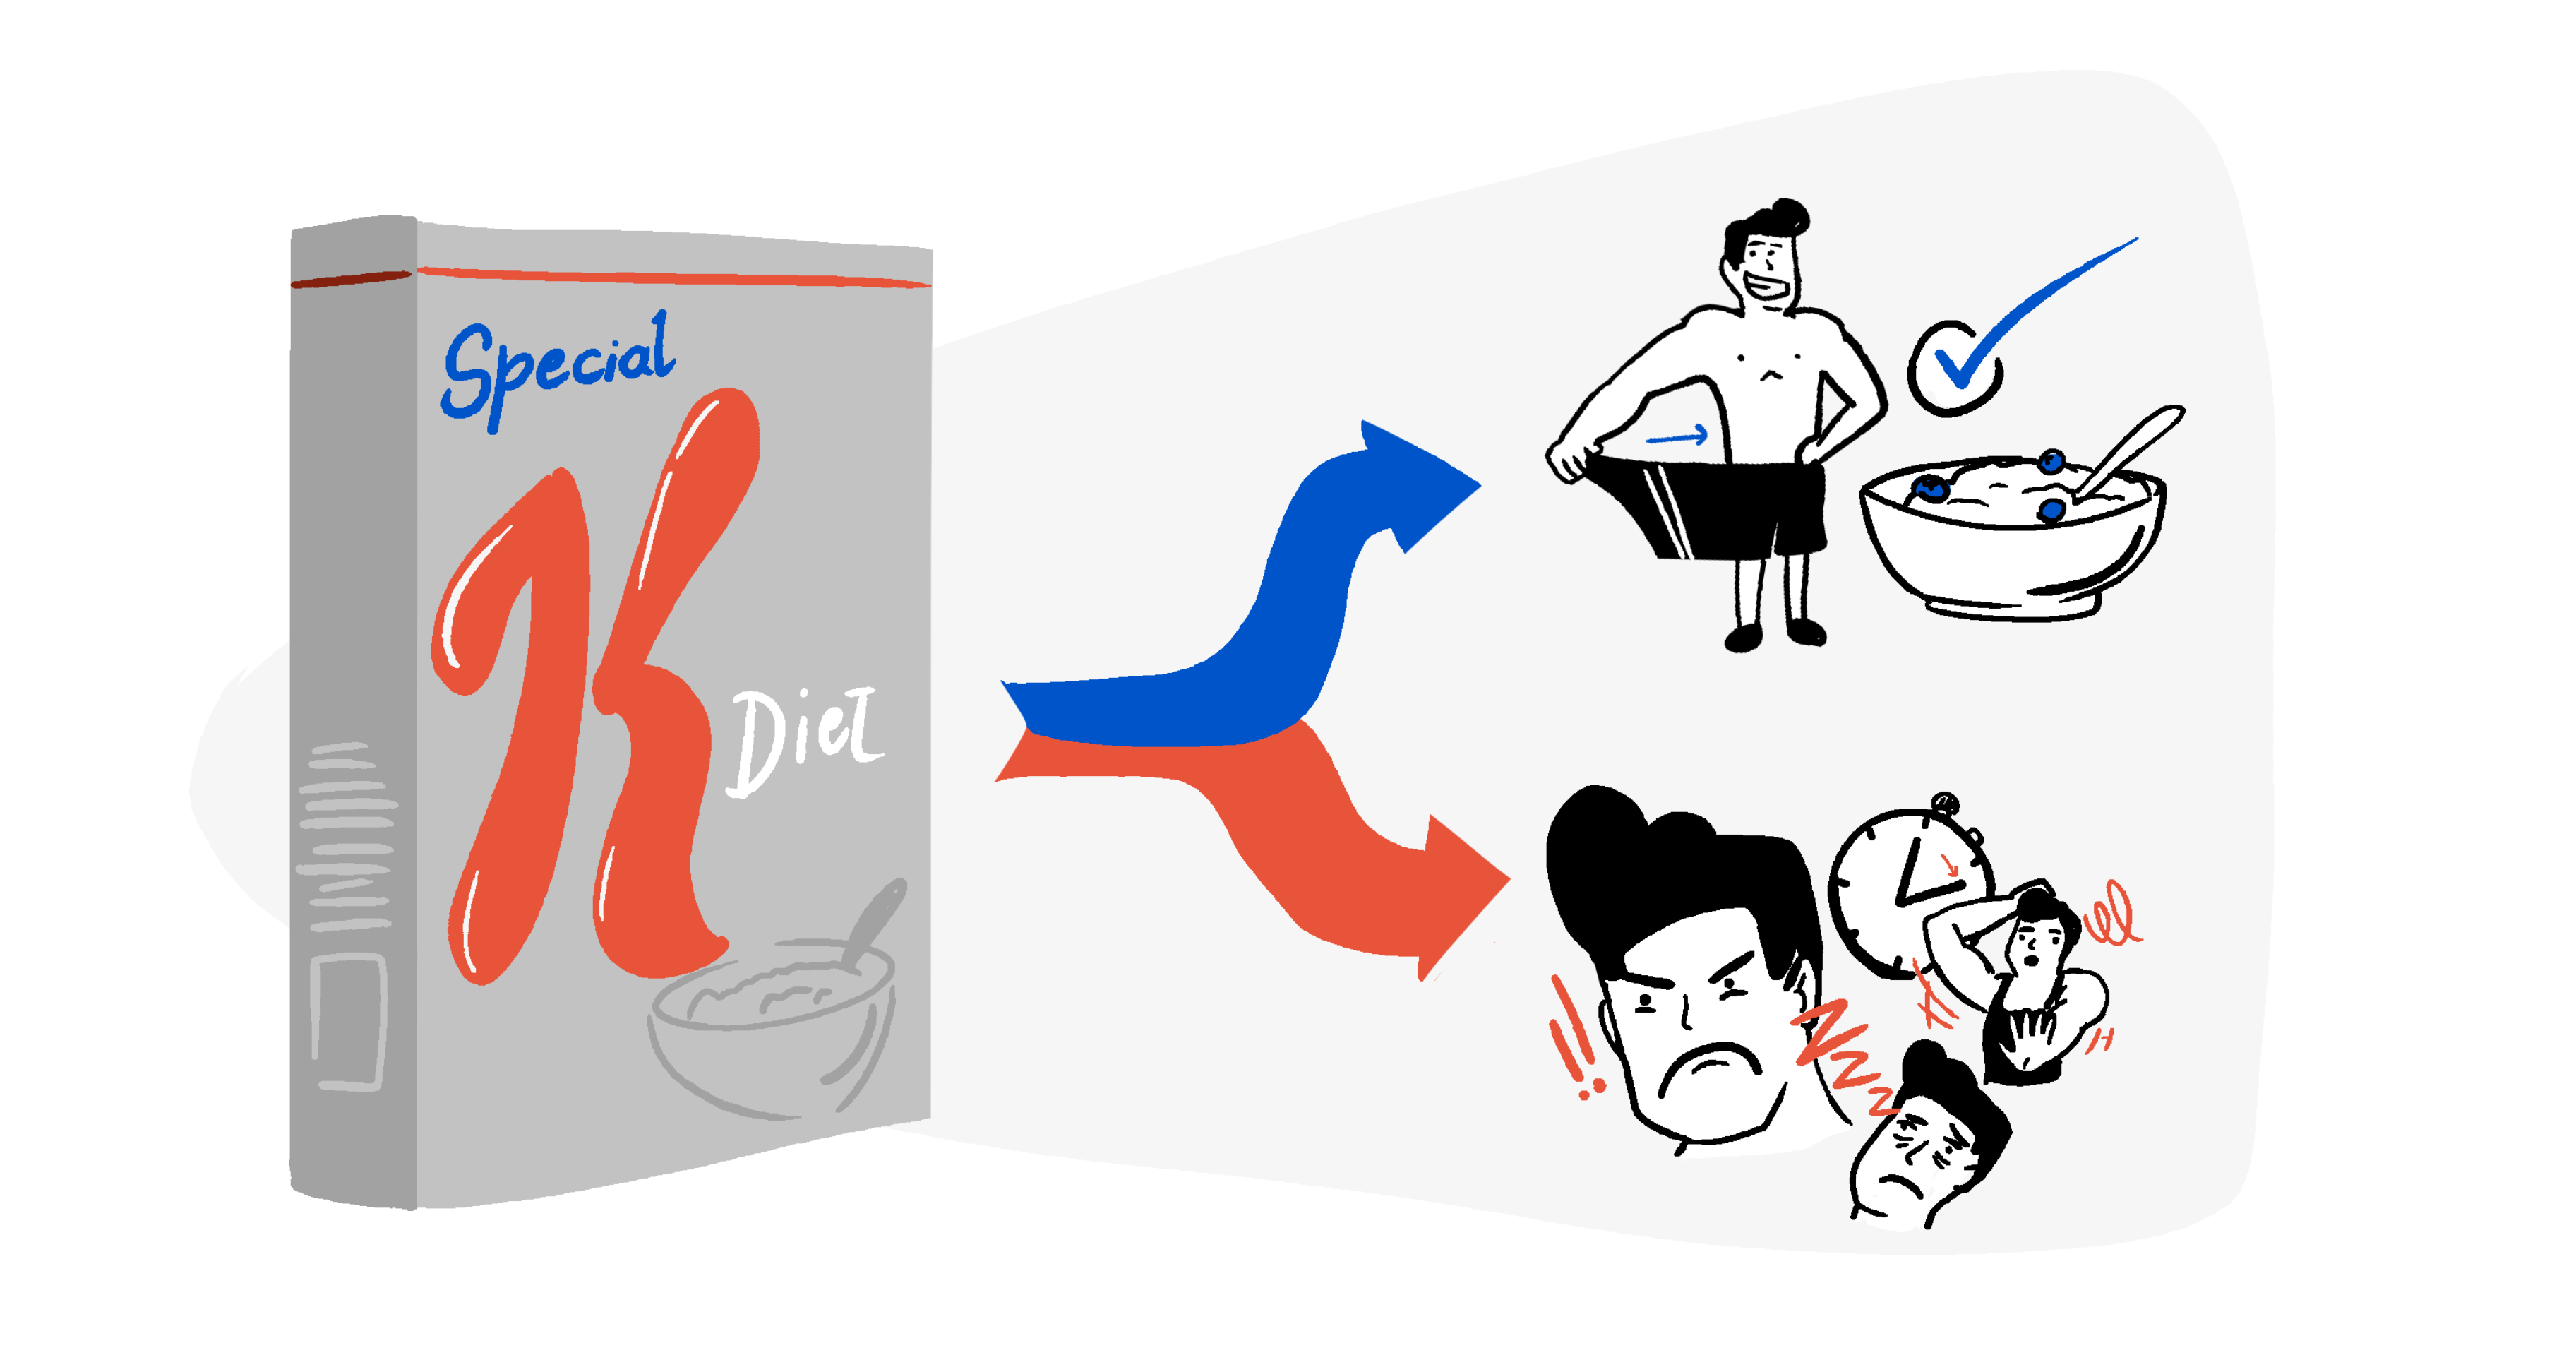 A special K breakfast cereal box that has two arrows or situations shown from it. One case where a man is eating healthy and slimmed down his waist size after trying the special k diet. Then the other where a man is angry and wondering if the diet even works.